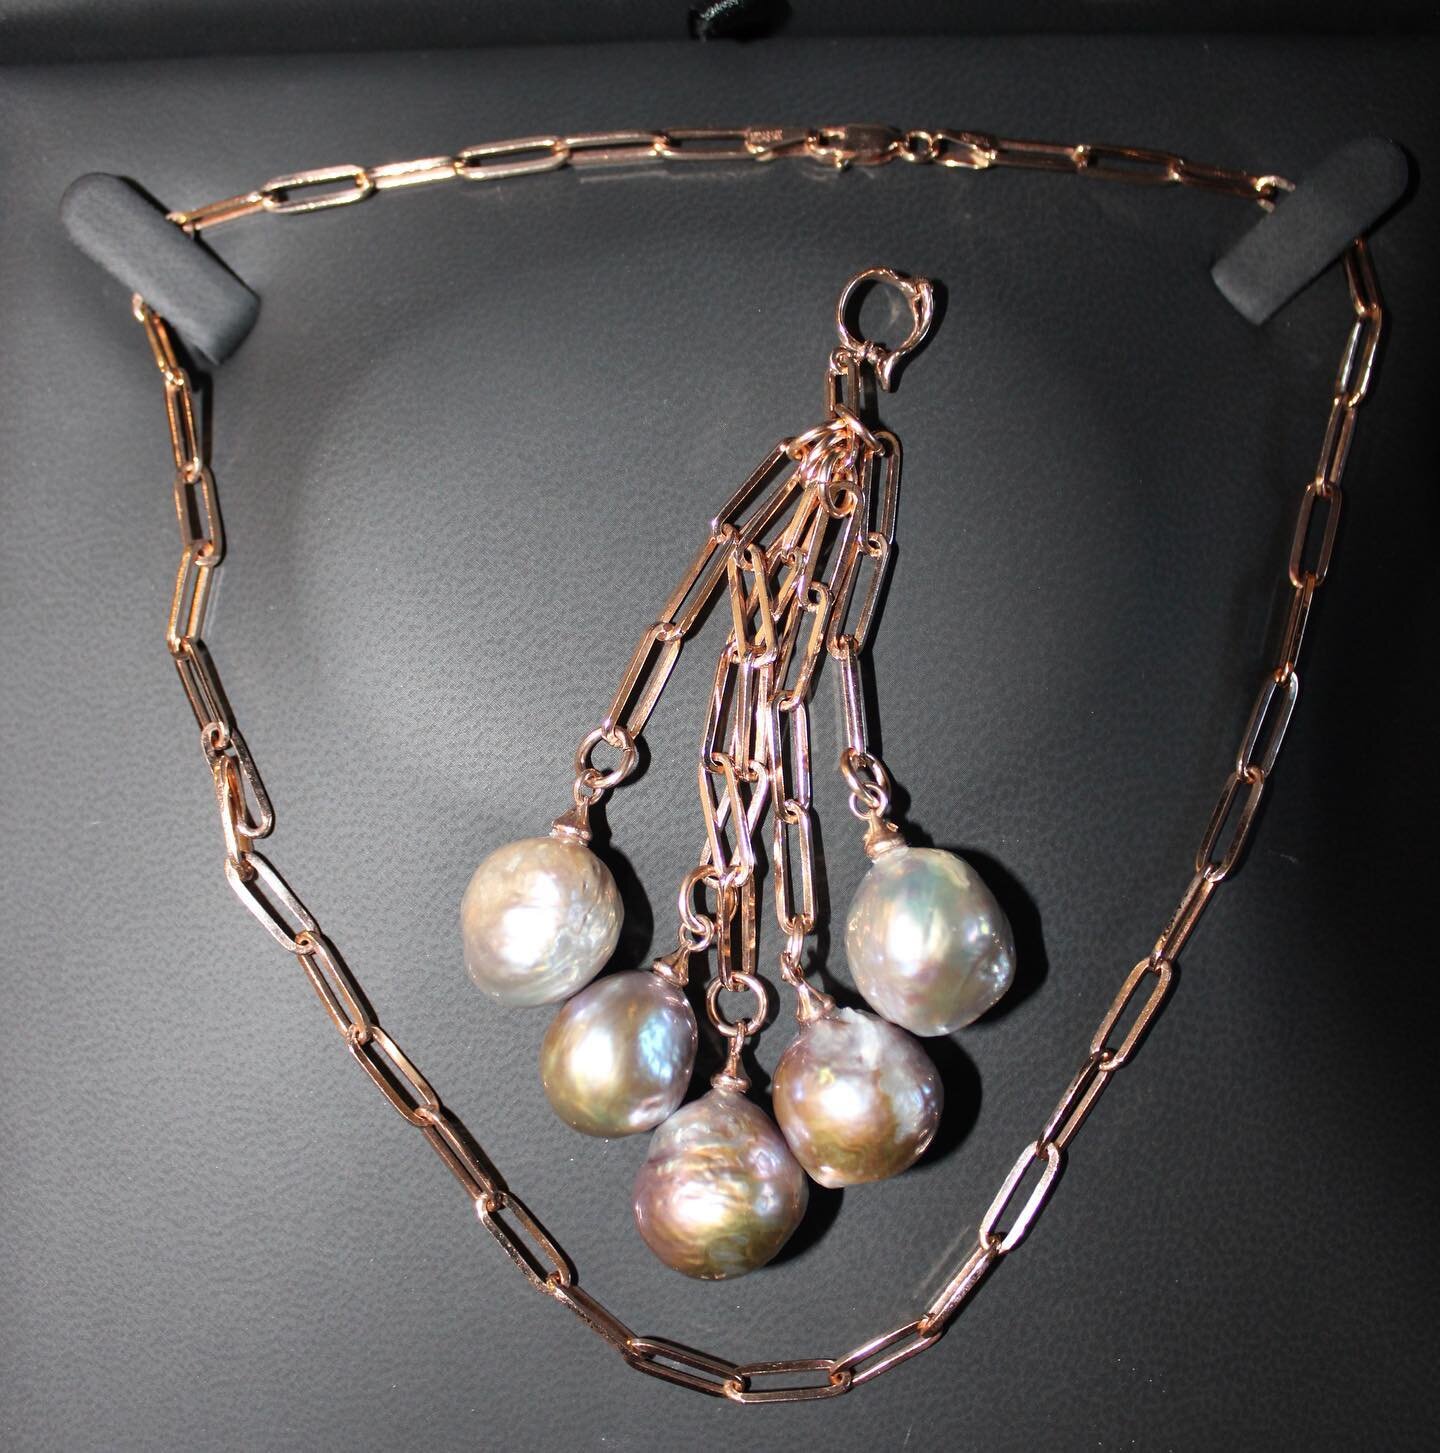 14k Rose Gold chain and matching pendant (designed as an enhancer) that can be added onto other strands in clients collection. 
These baroque pearls were some of the most beautiful I&rsquo;ve seen, with a wide range of colors that came through with l